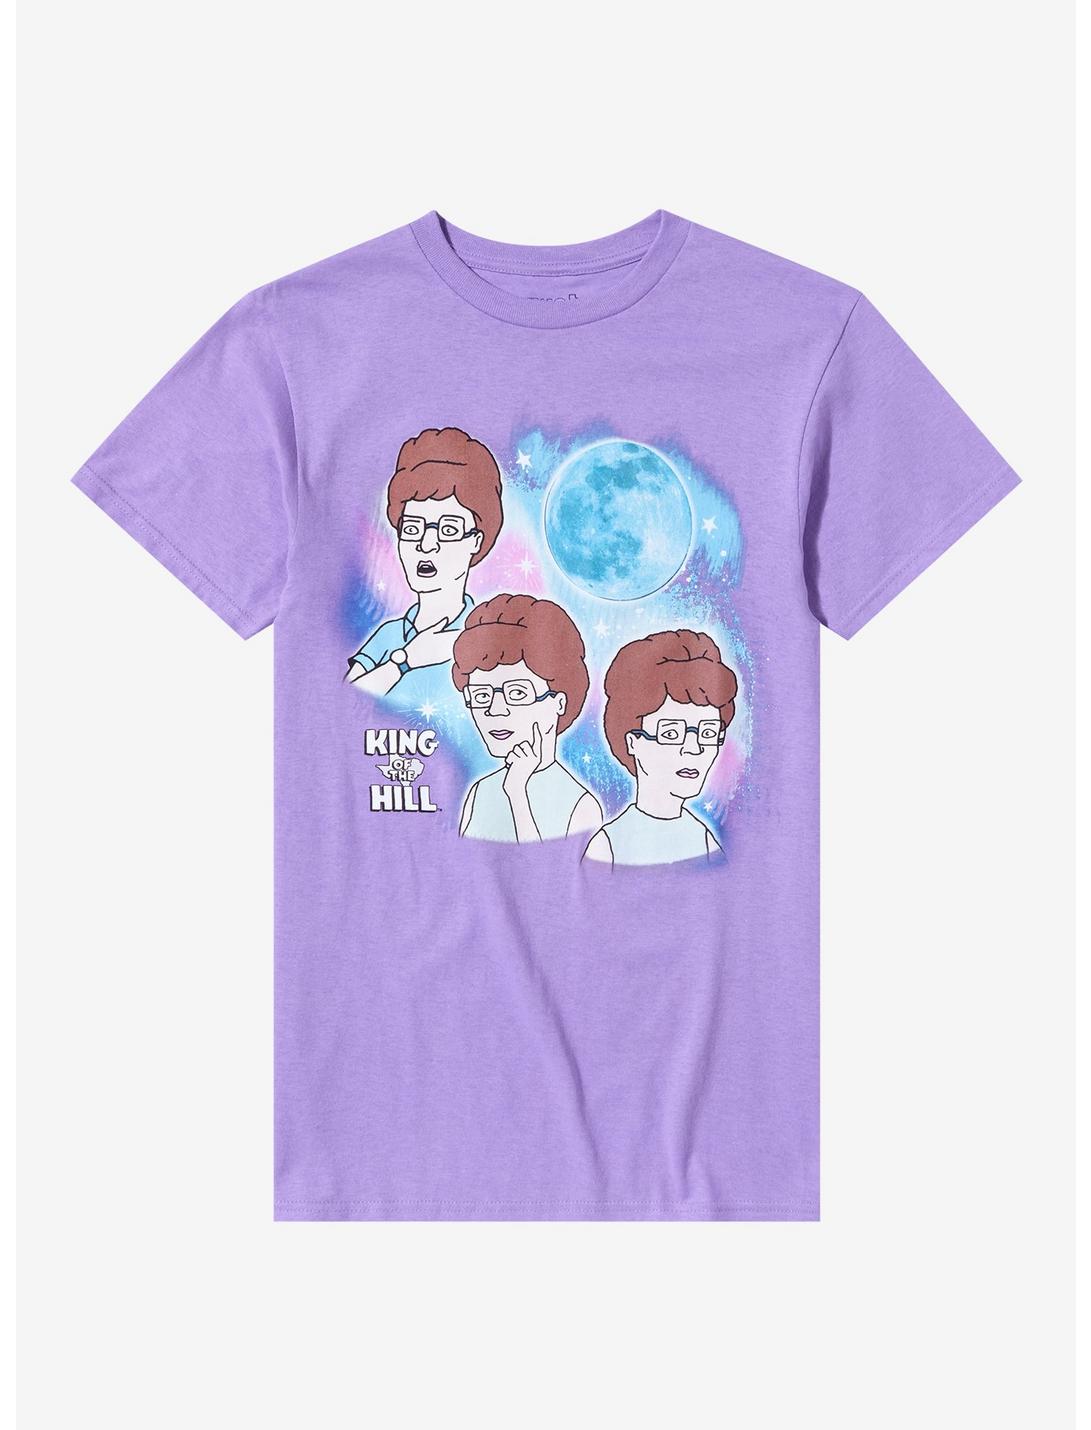 King Of The Hill Peggy Hill Collage Boyfriend Fit Girls T-Shirt, MULTI, hi-res